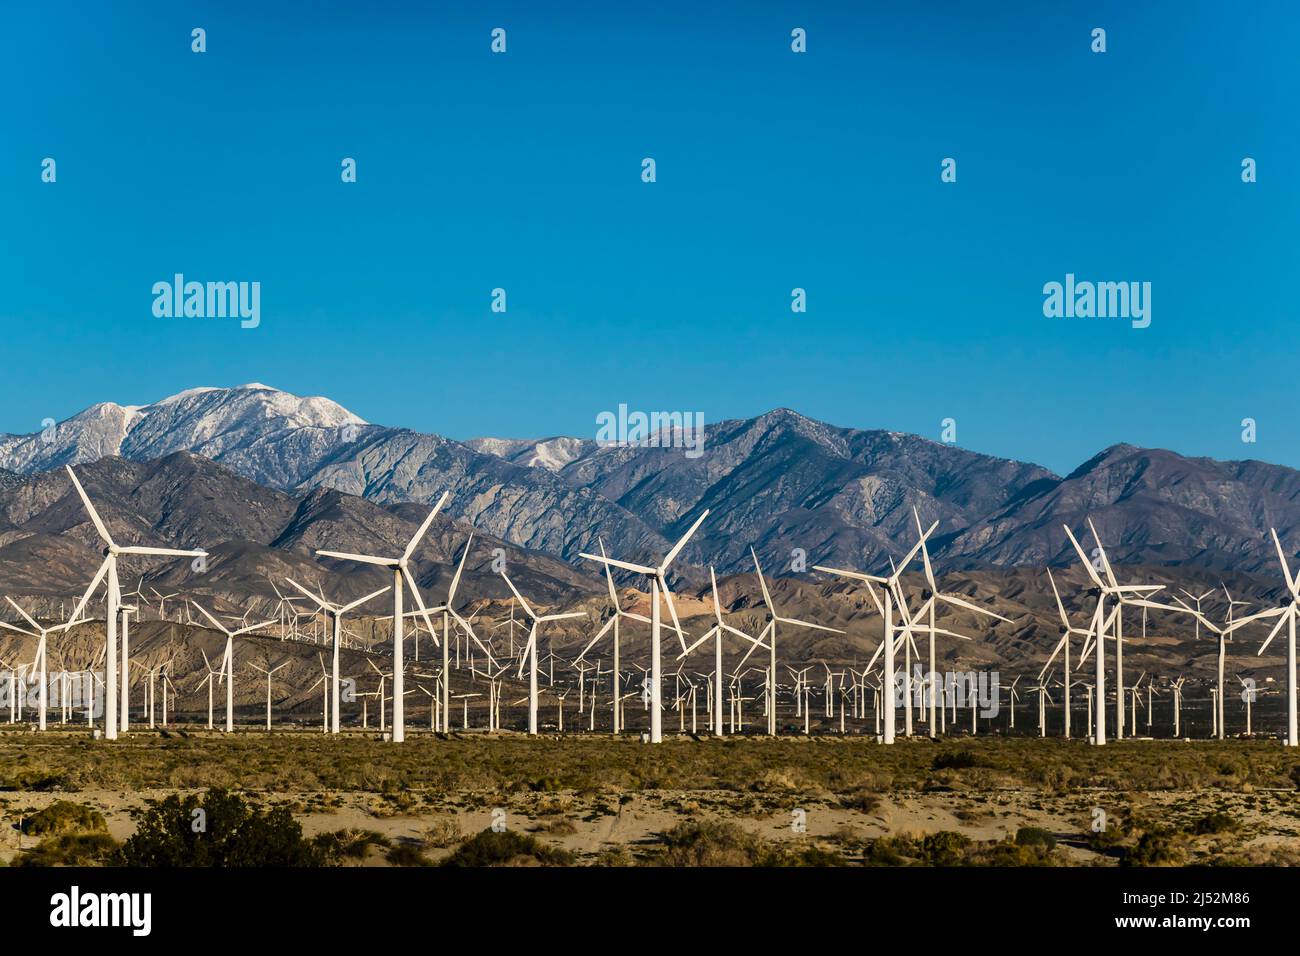 A large wind farm in Palm Springs, California Stock Photo